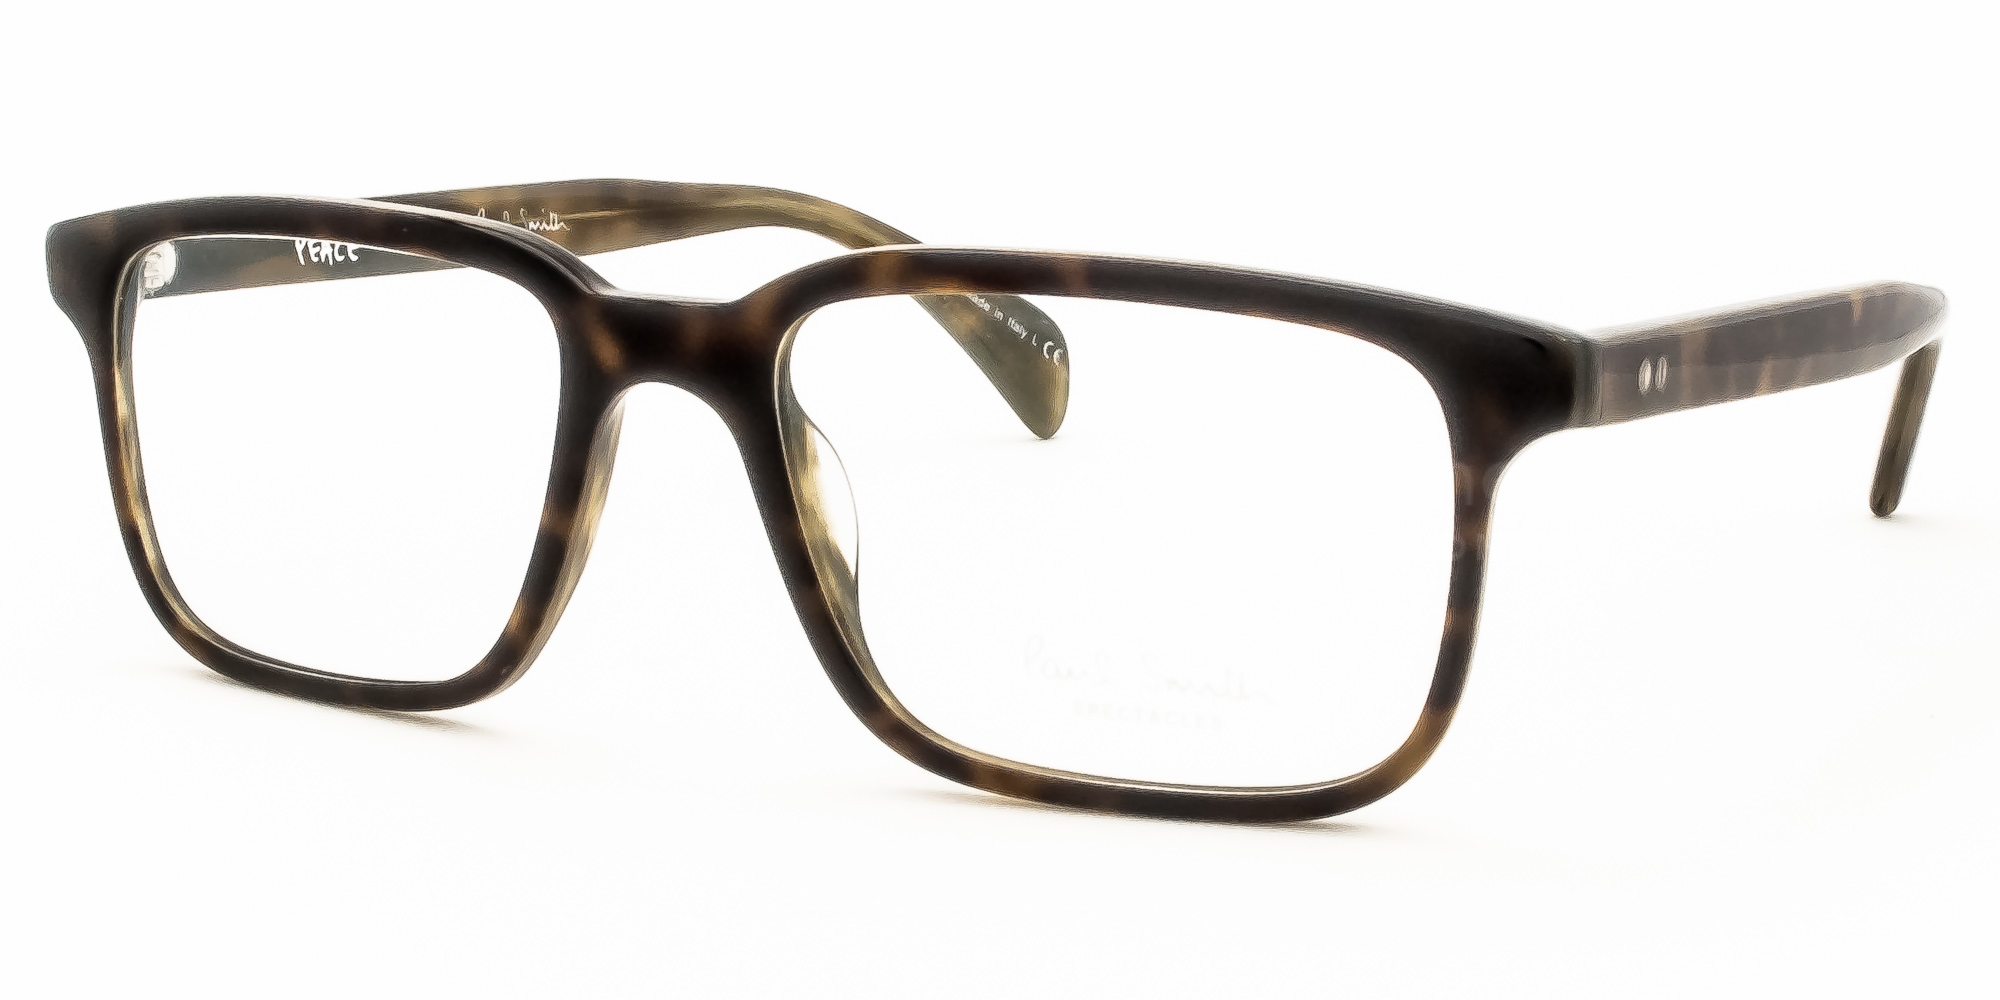  clear/ olive tortoise